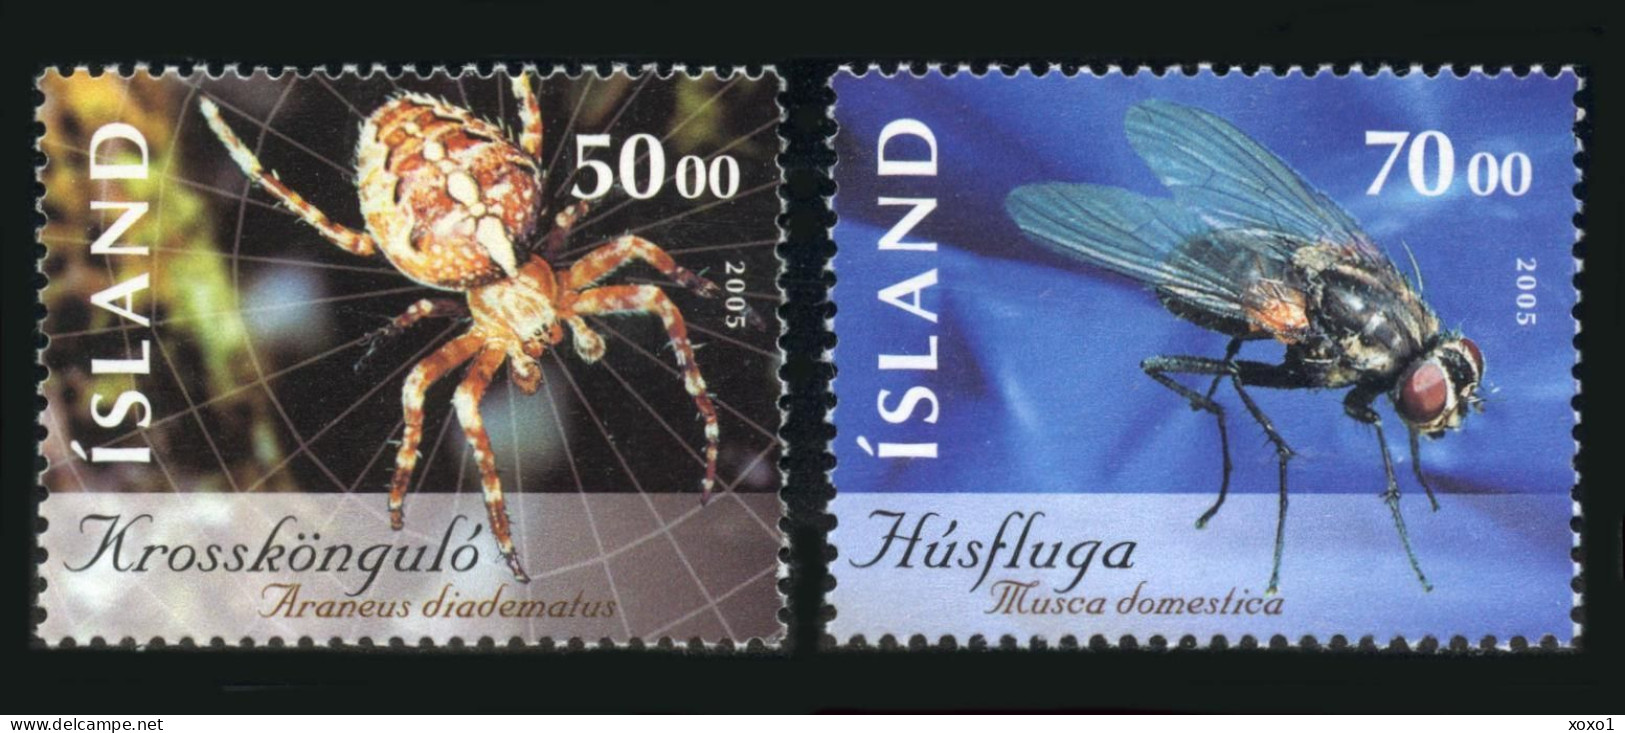 Iceland 2005  MiNr. 1075 - 1076 Island Insects And Spiders  # 2     2v  MNH** 3.50 € - Coléoptères